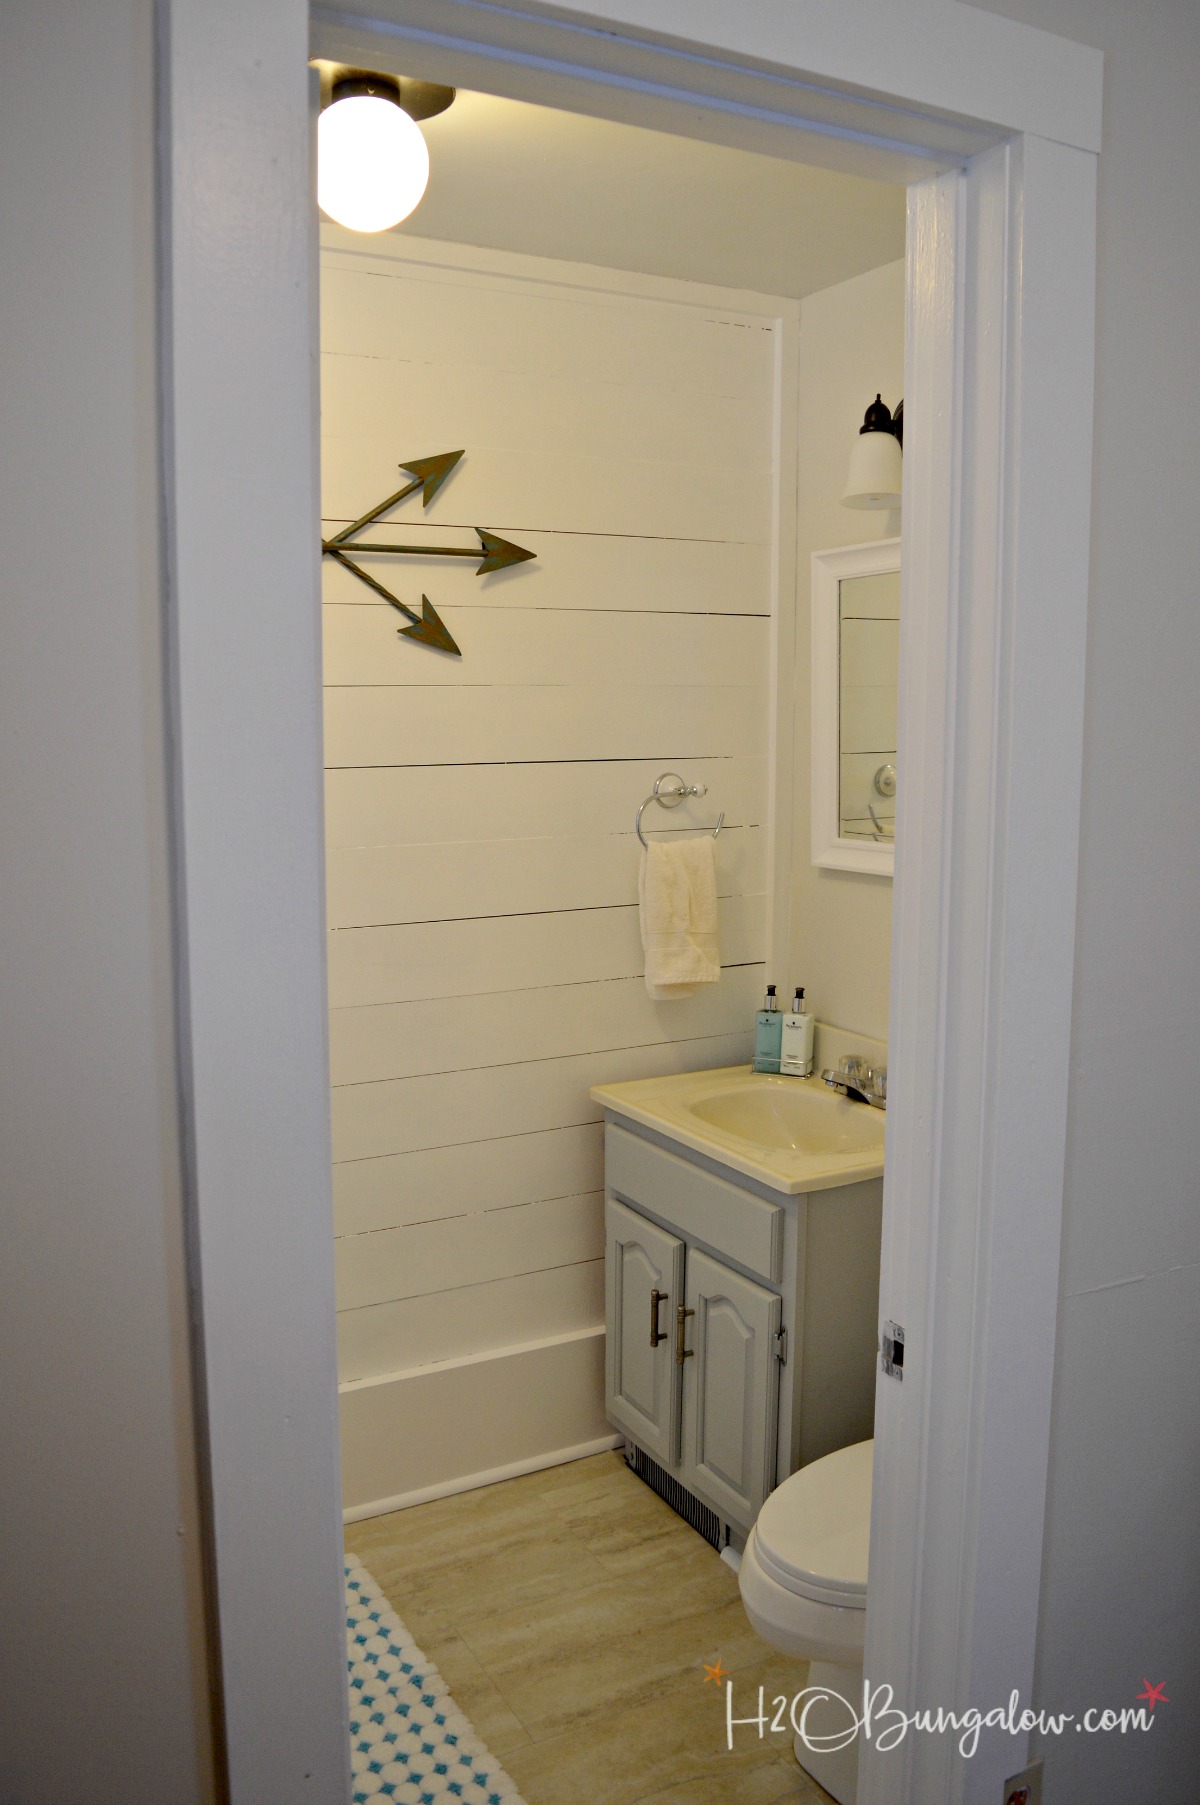 Five inspiring before and after bathroom makeovers from a DIY Blogger. Includes coastal, farmhouse and contemporary bathroom makeover and remodel ideas with tutorials. Find over 450 home improvement and home decor tutorials on H2OBungalow.com